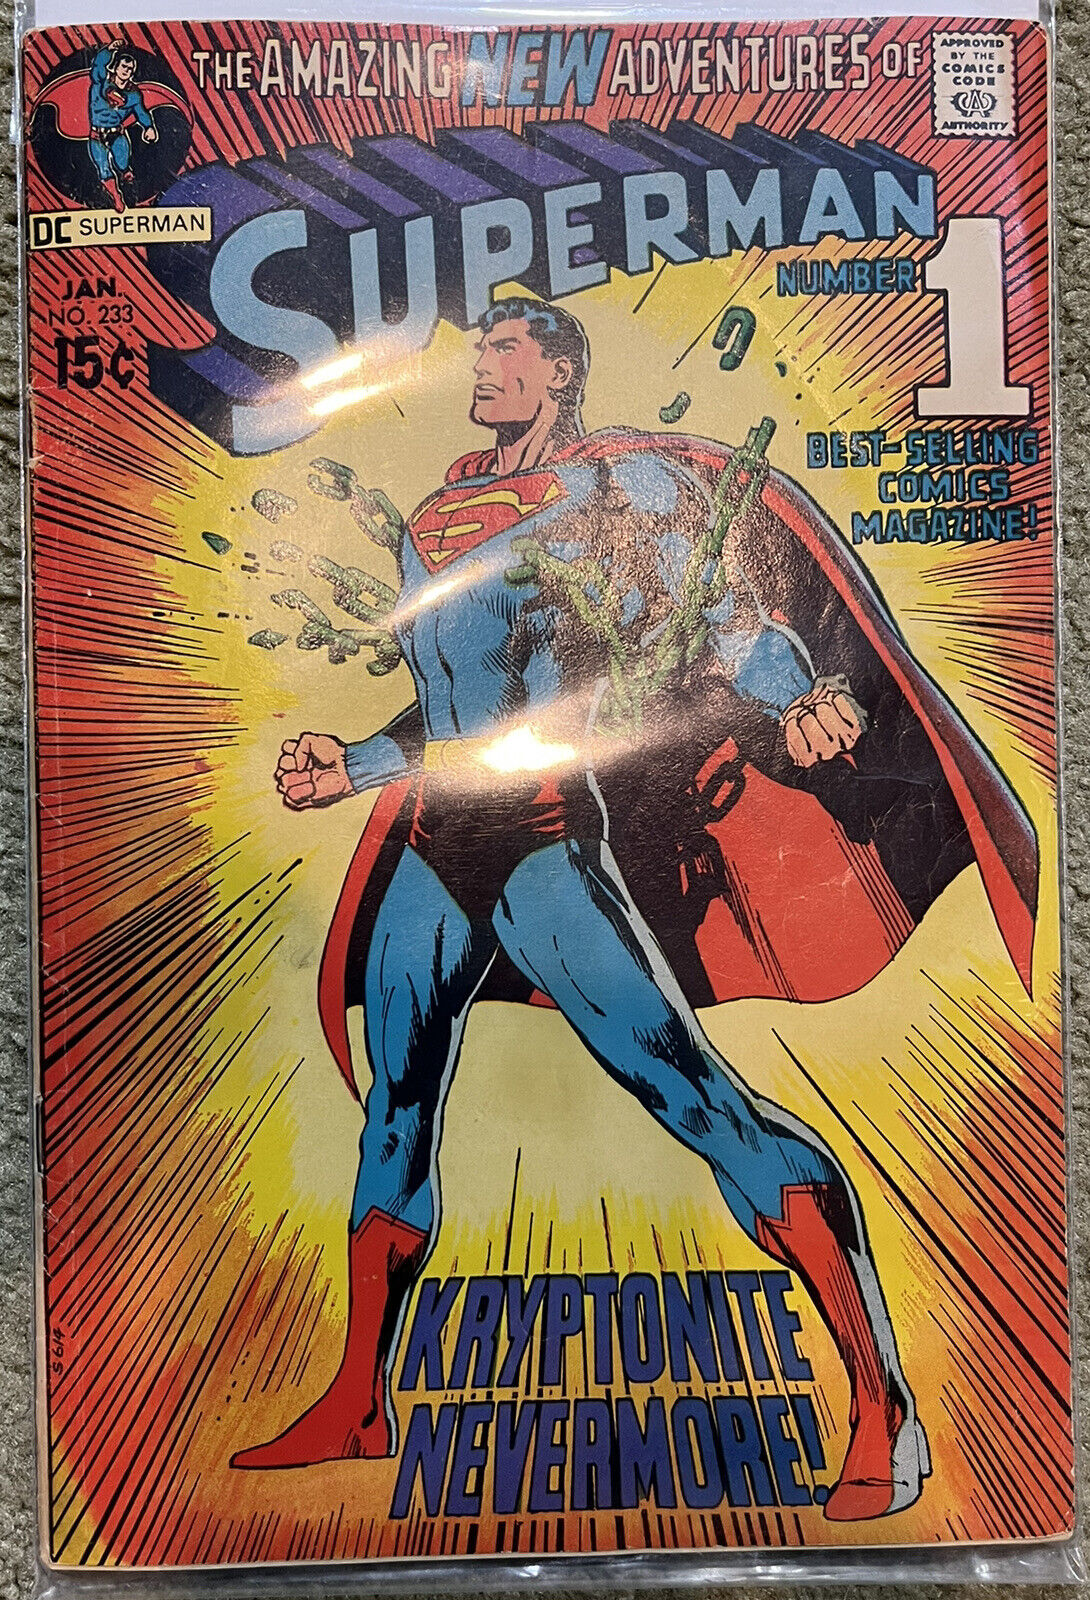 1971 Superman #233 GD/VG 3.0 Kryptonite Nevermore Number 1 Selling Comic Book